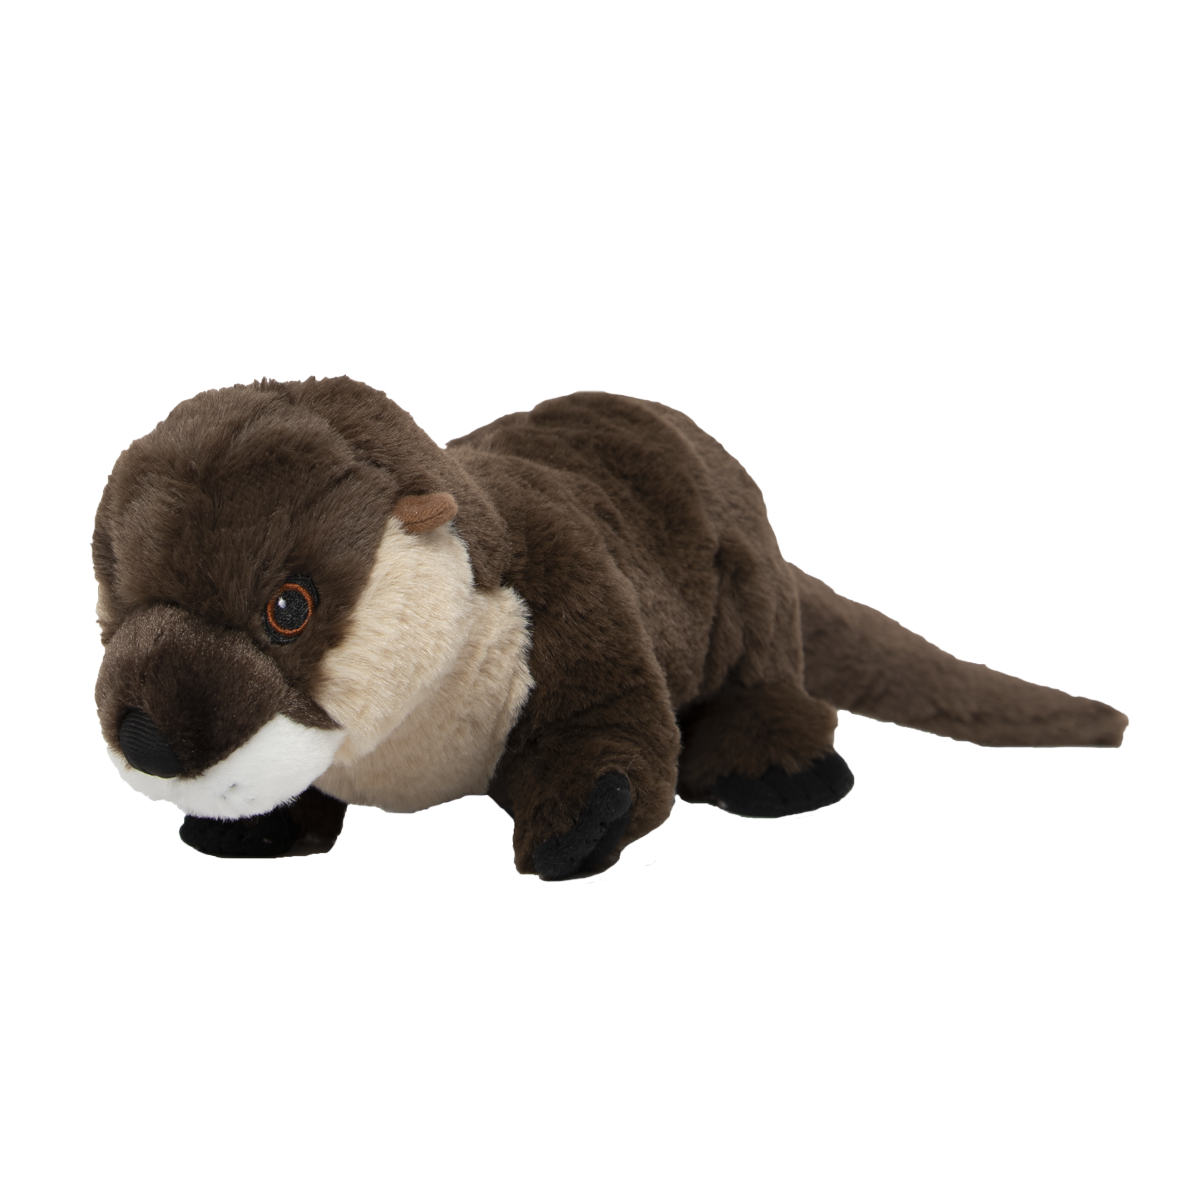 An otter stuffed animal with a brown body, light brown chest, white snout, and long tale. 